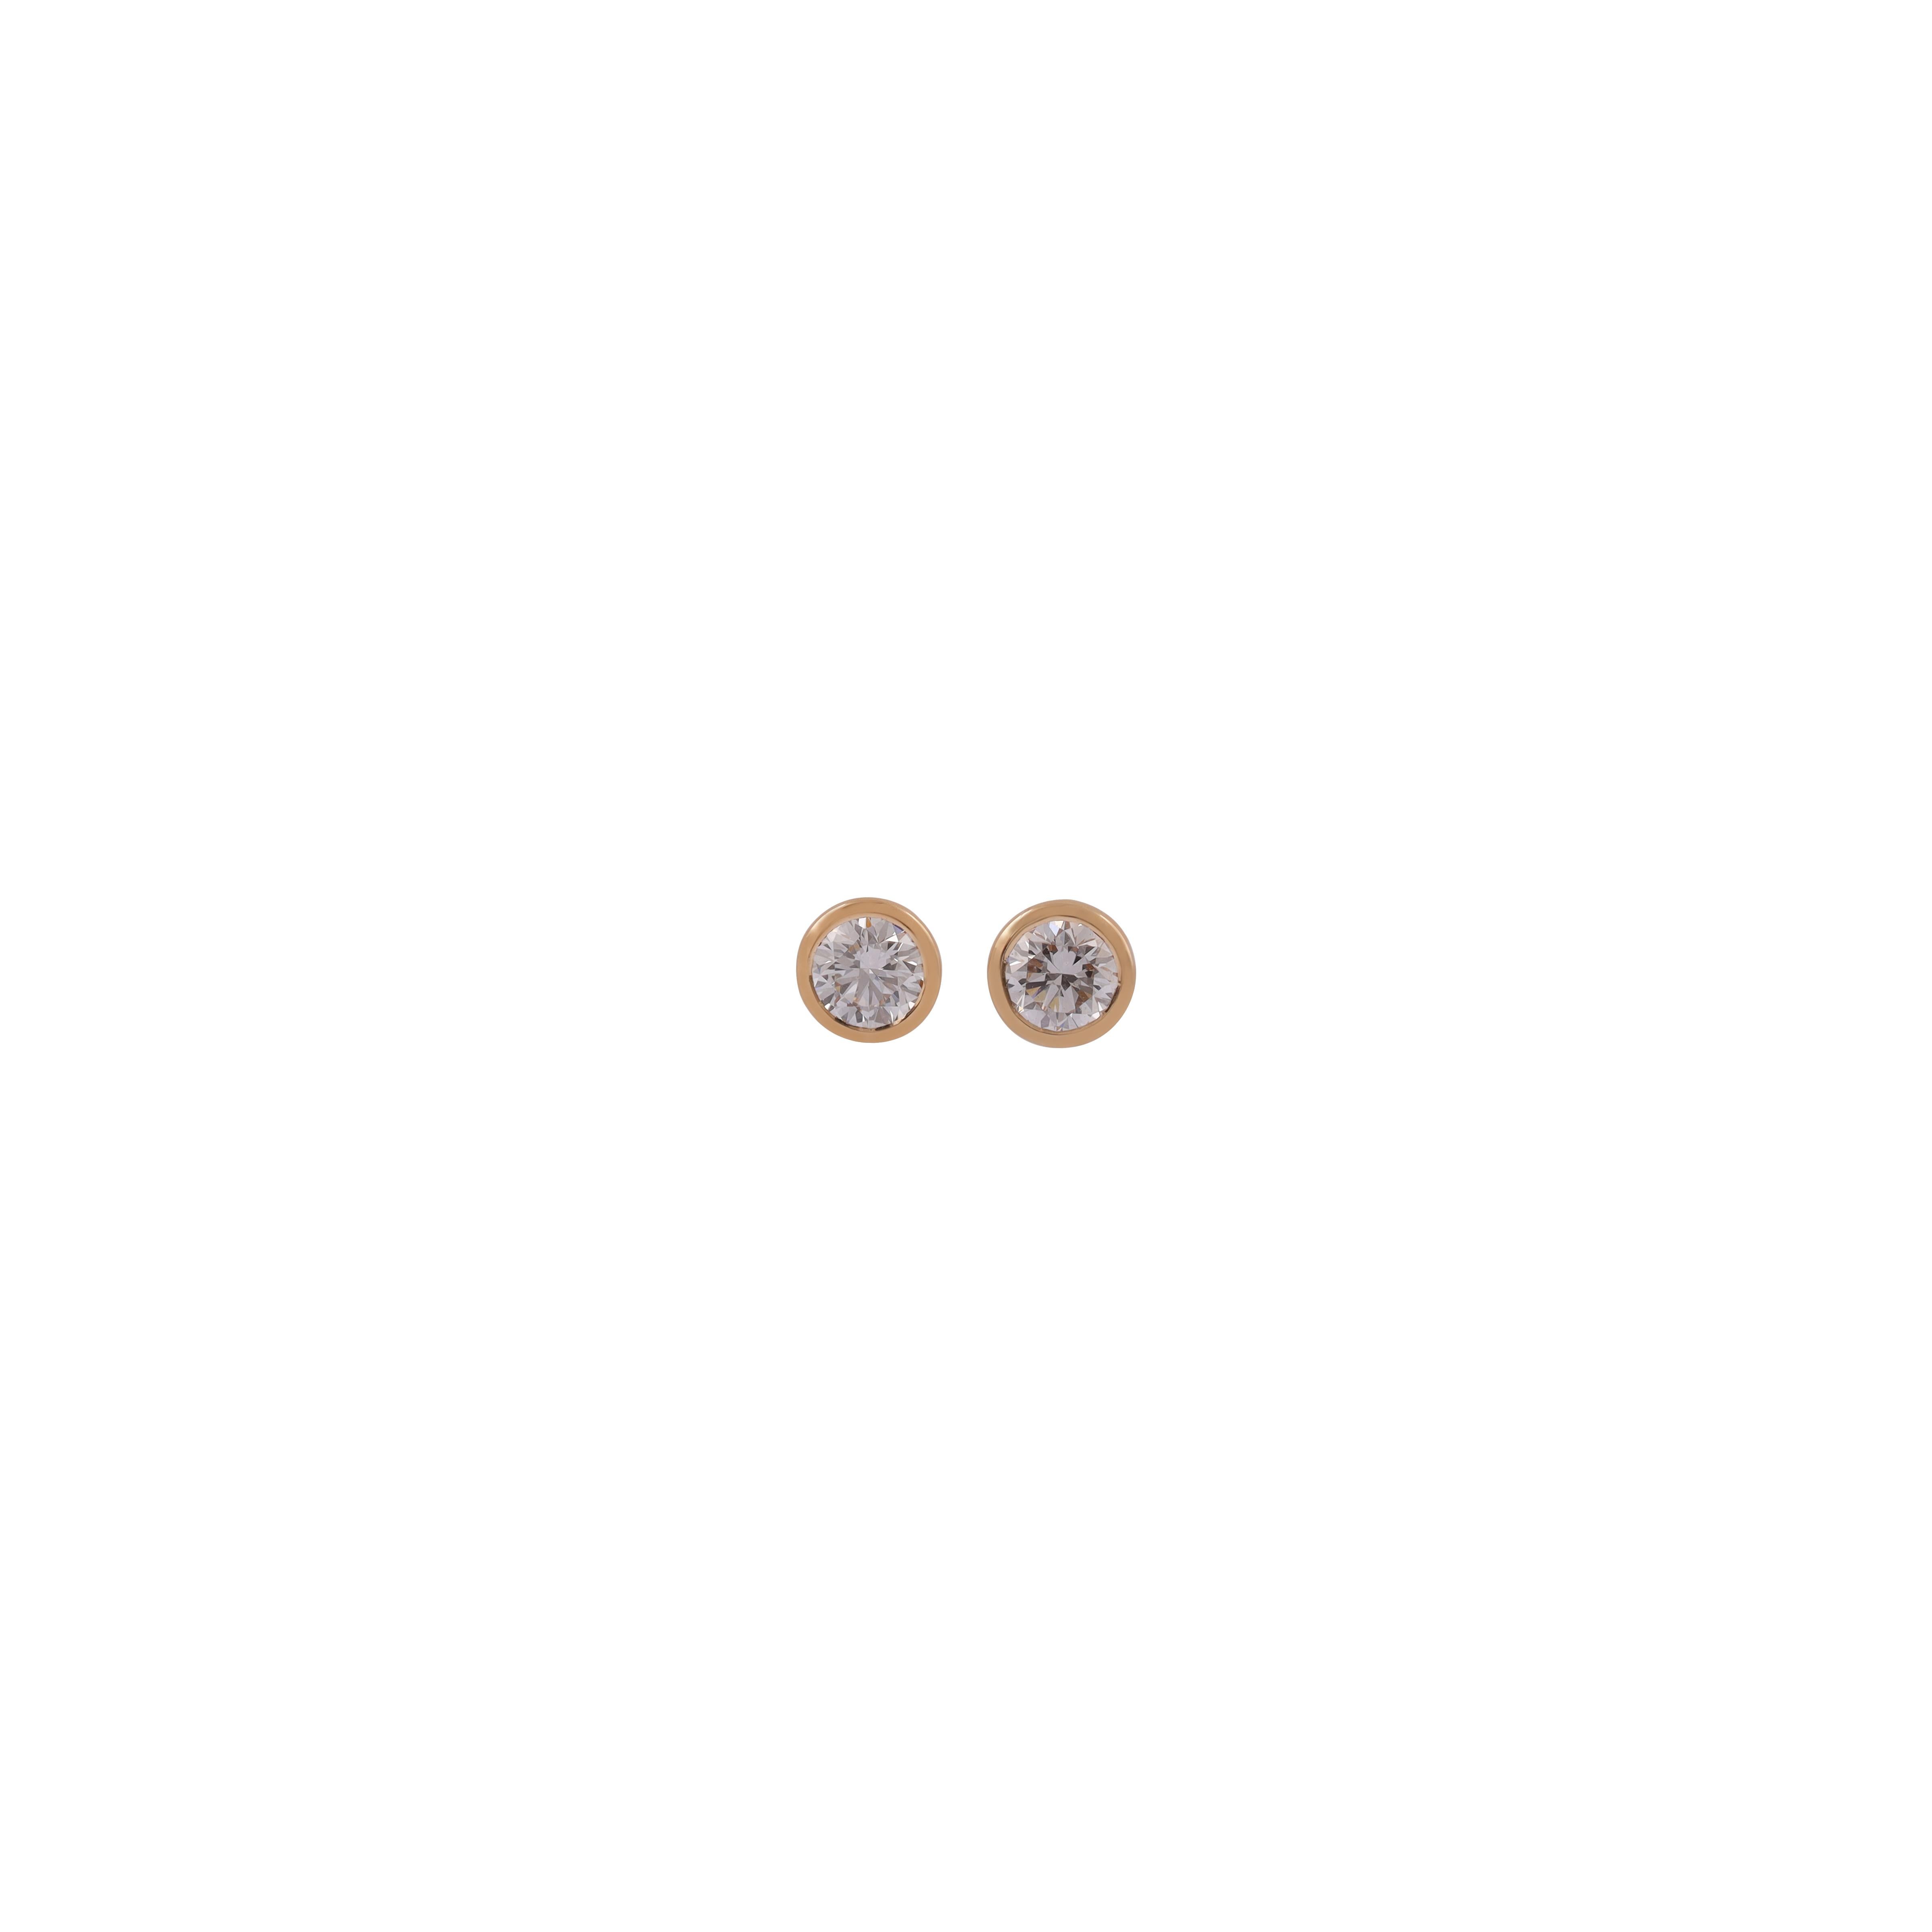 Diamond stud earrings weighing 0.46 Carats, in 18 Karat Yellow Gold close  Setting.
Eye Clean, will not be able to tell on the Ear.
Great Pair for the Price too!
Gold - 1.86gm

More Diamond Studs Available